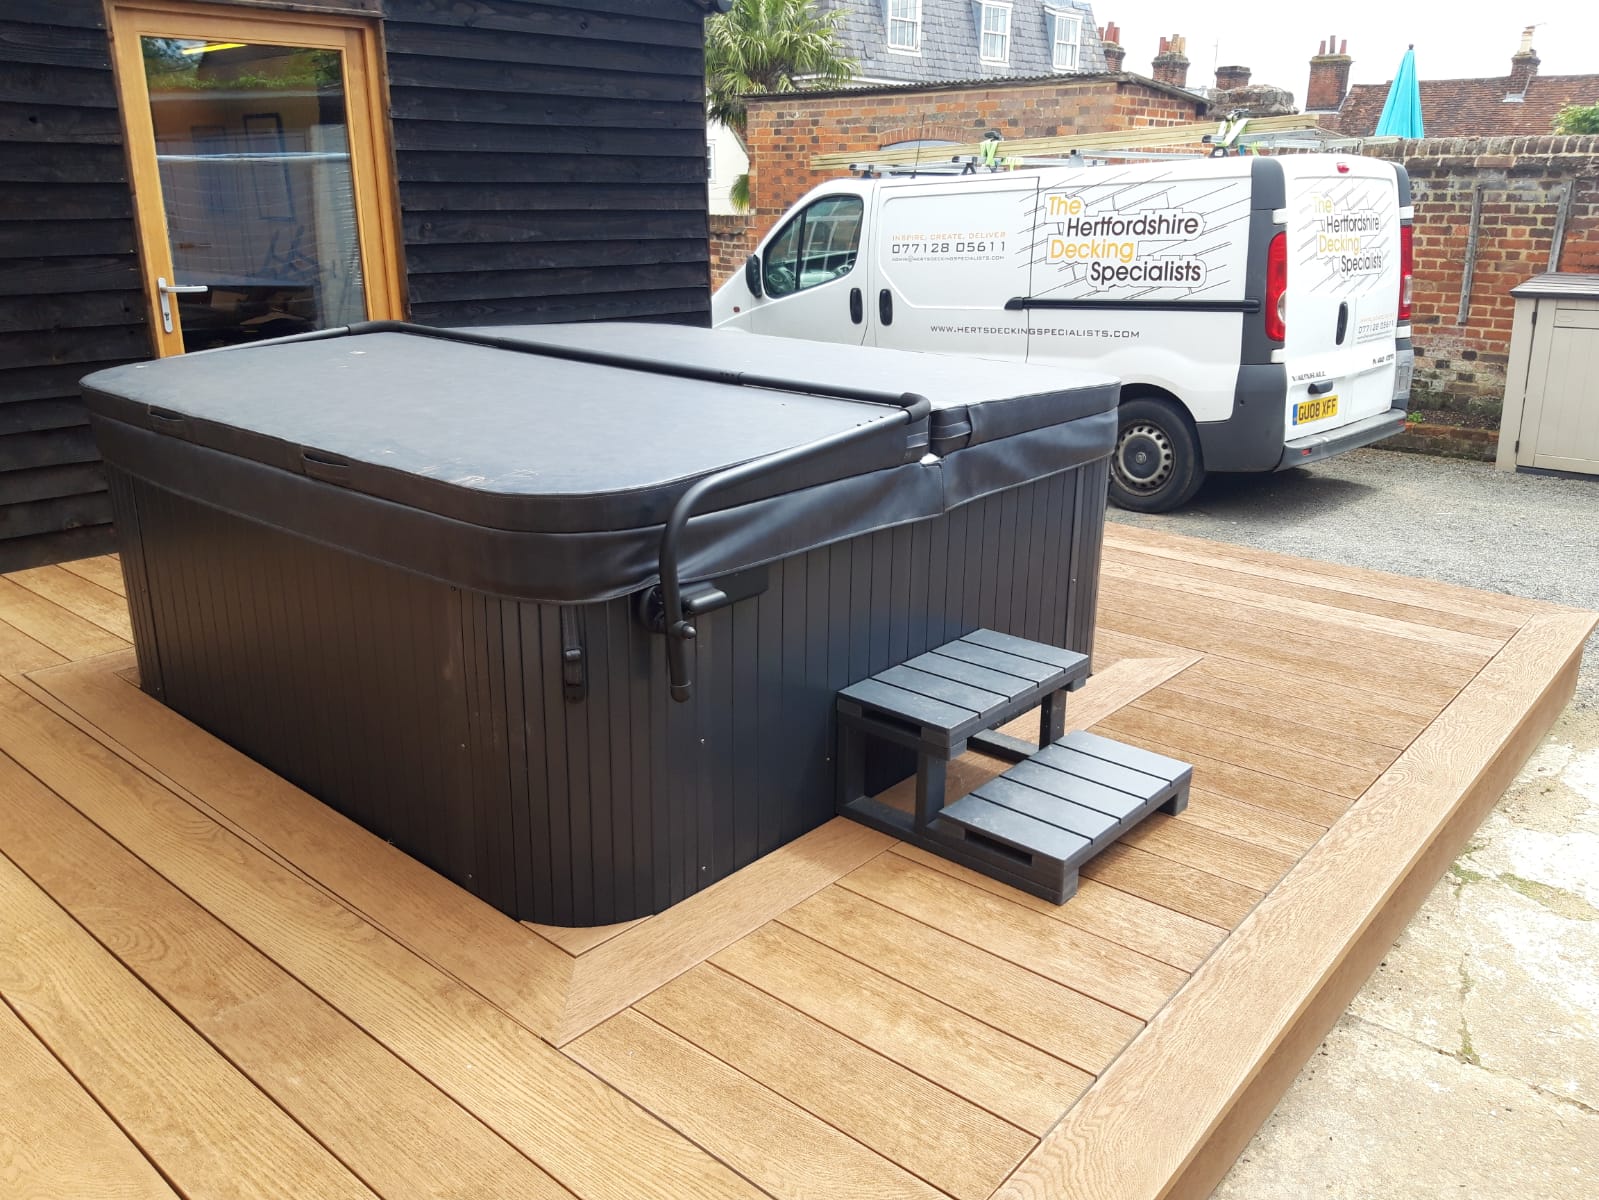 Hot tub with Millboard surround